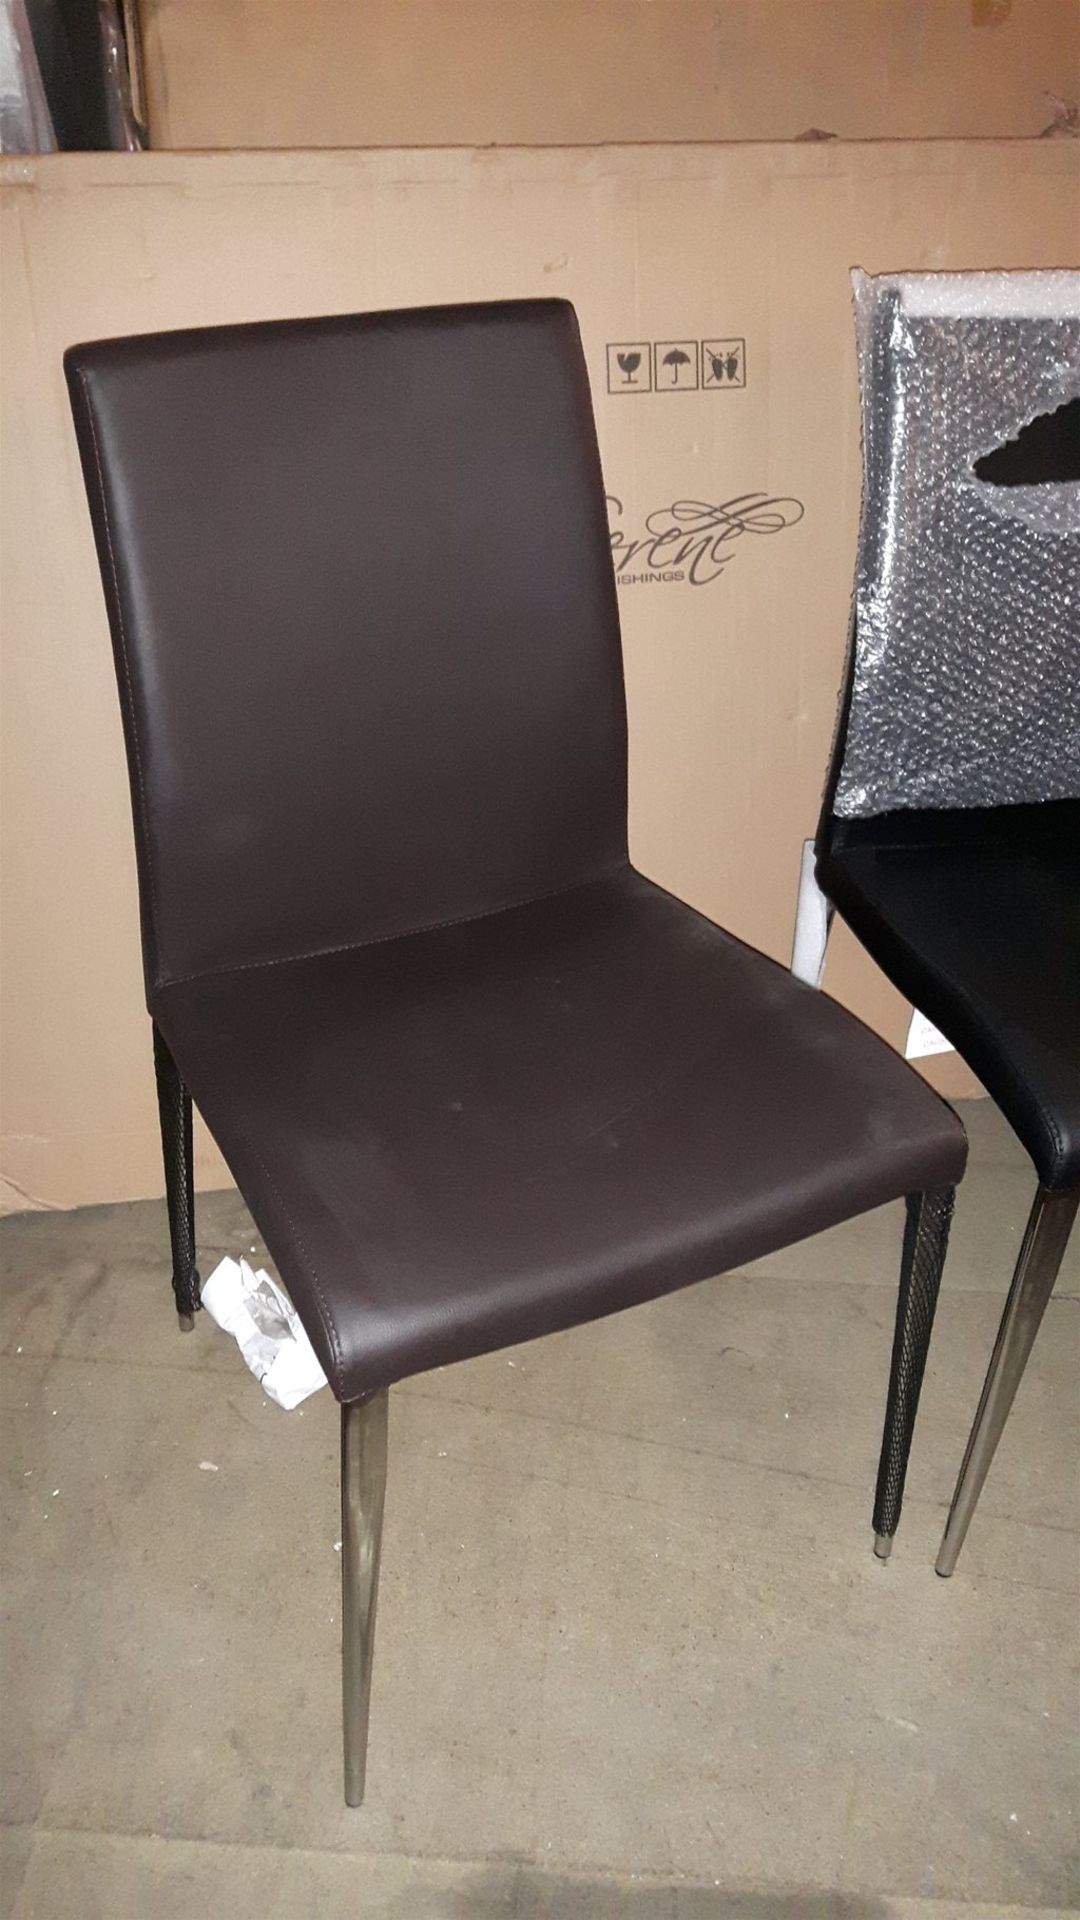 3 Black faux leather dining chairs with chrome legs - Image 2 of 3